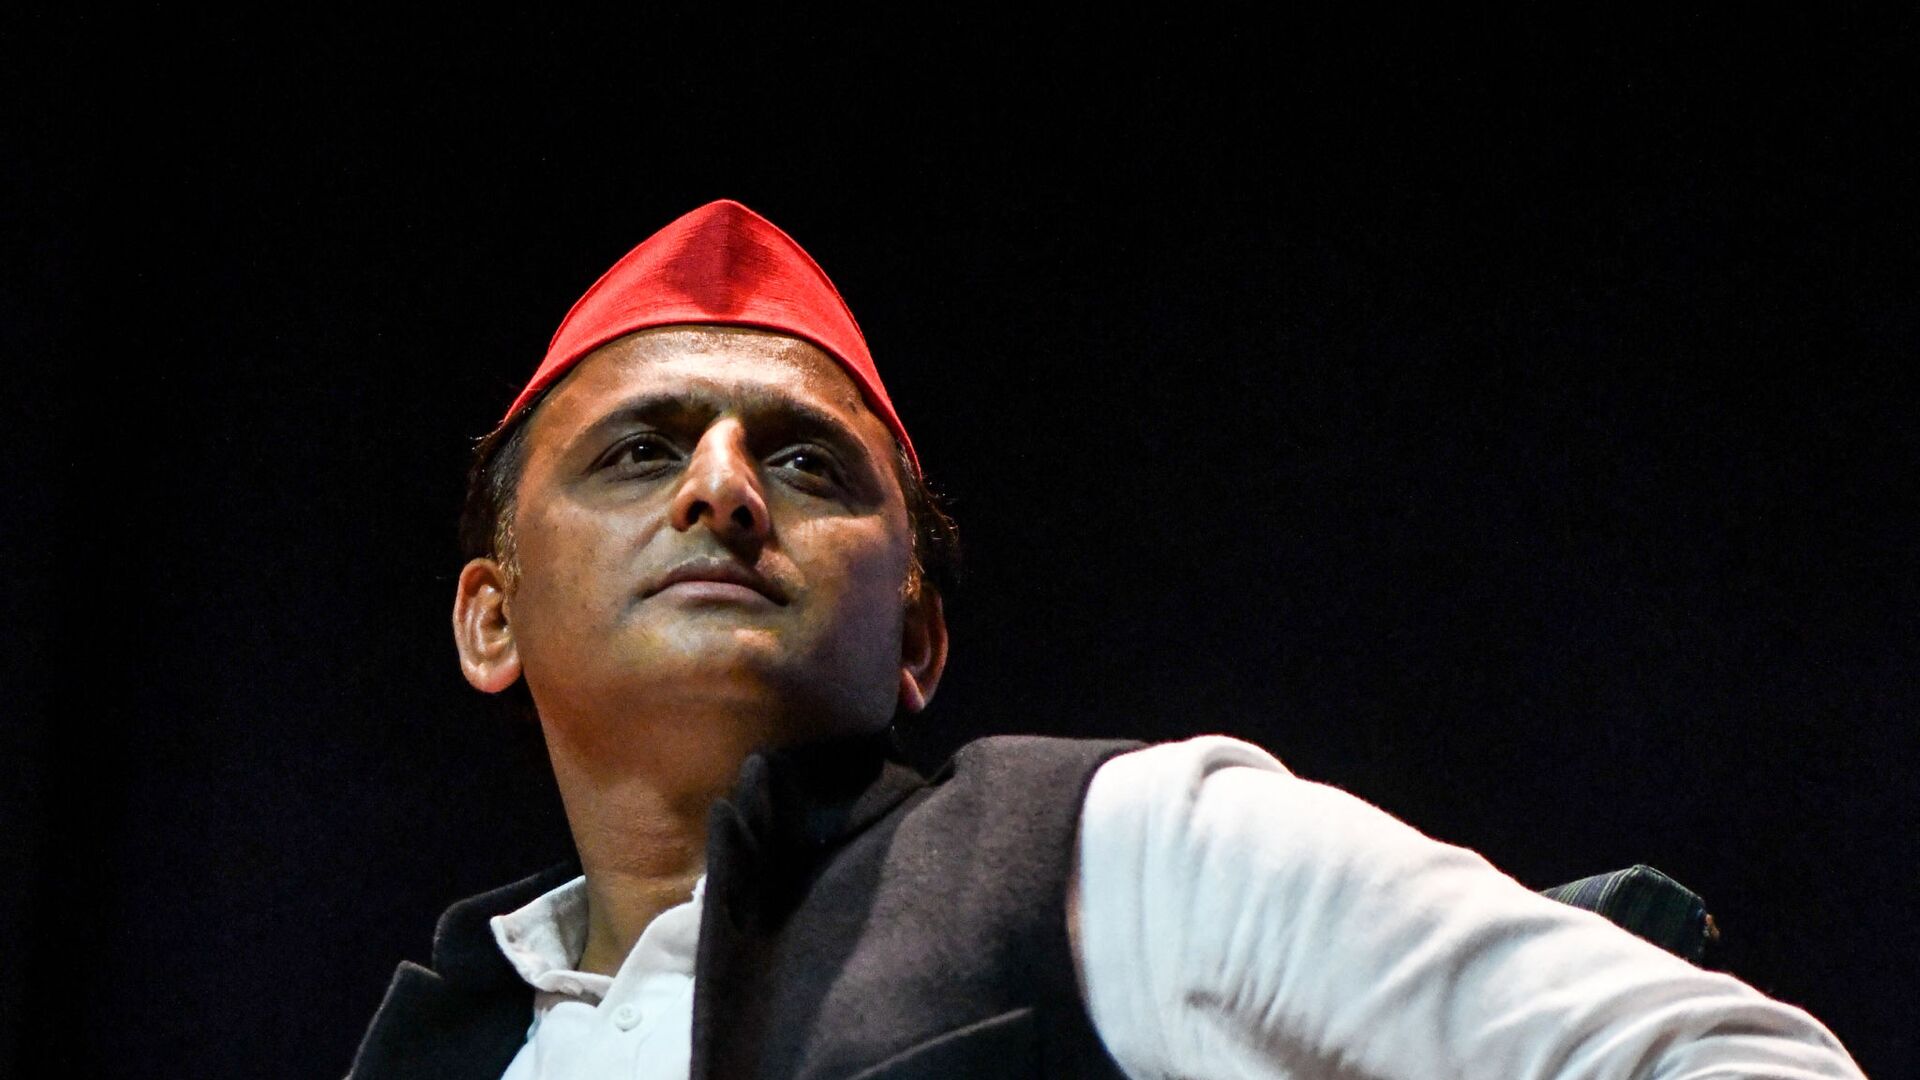 Former Uttar Pradesh chief minister and Samajwadi Party president Akhilesh Yadav looks on during a town hall interaction at the Nehru Memorial Museum and Library (NMML) auditorium in New Delhi on February 9, 2019 - Sputnik International, 1920, 12.10.2021